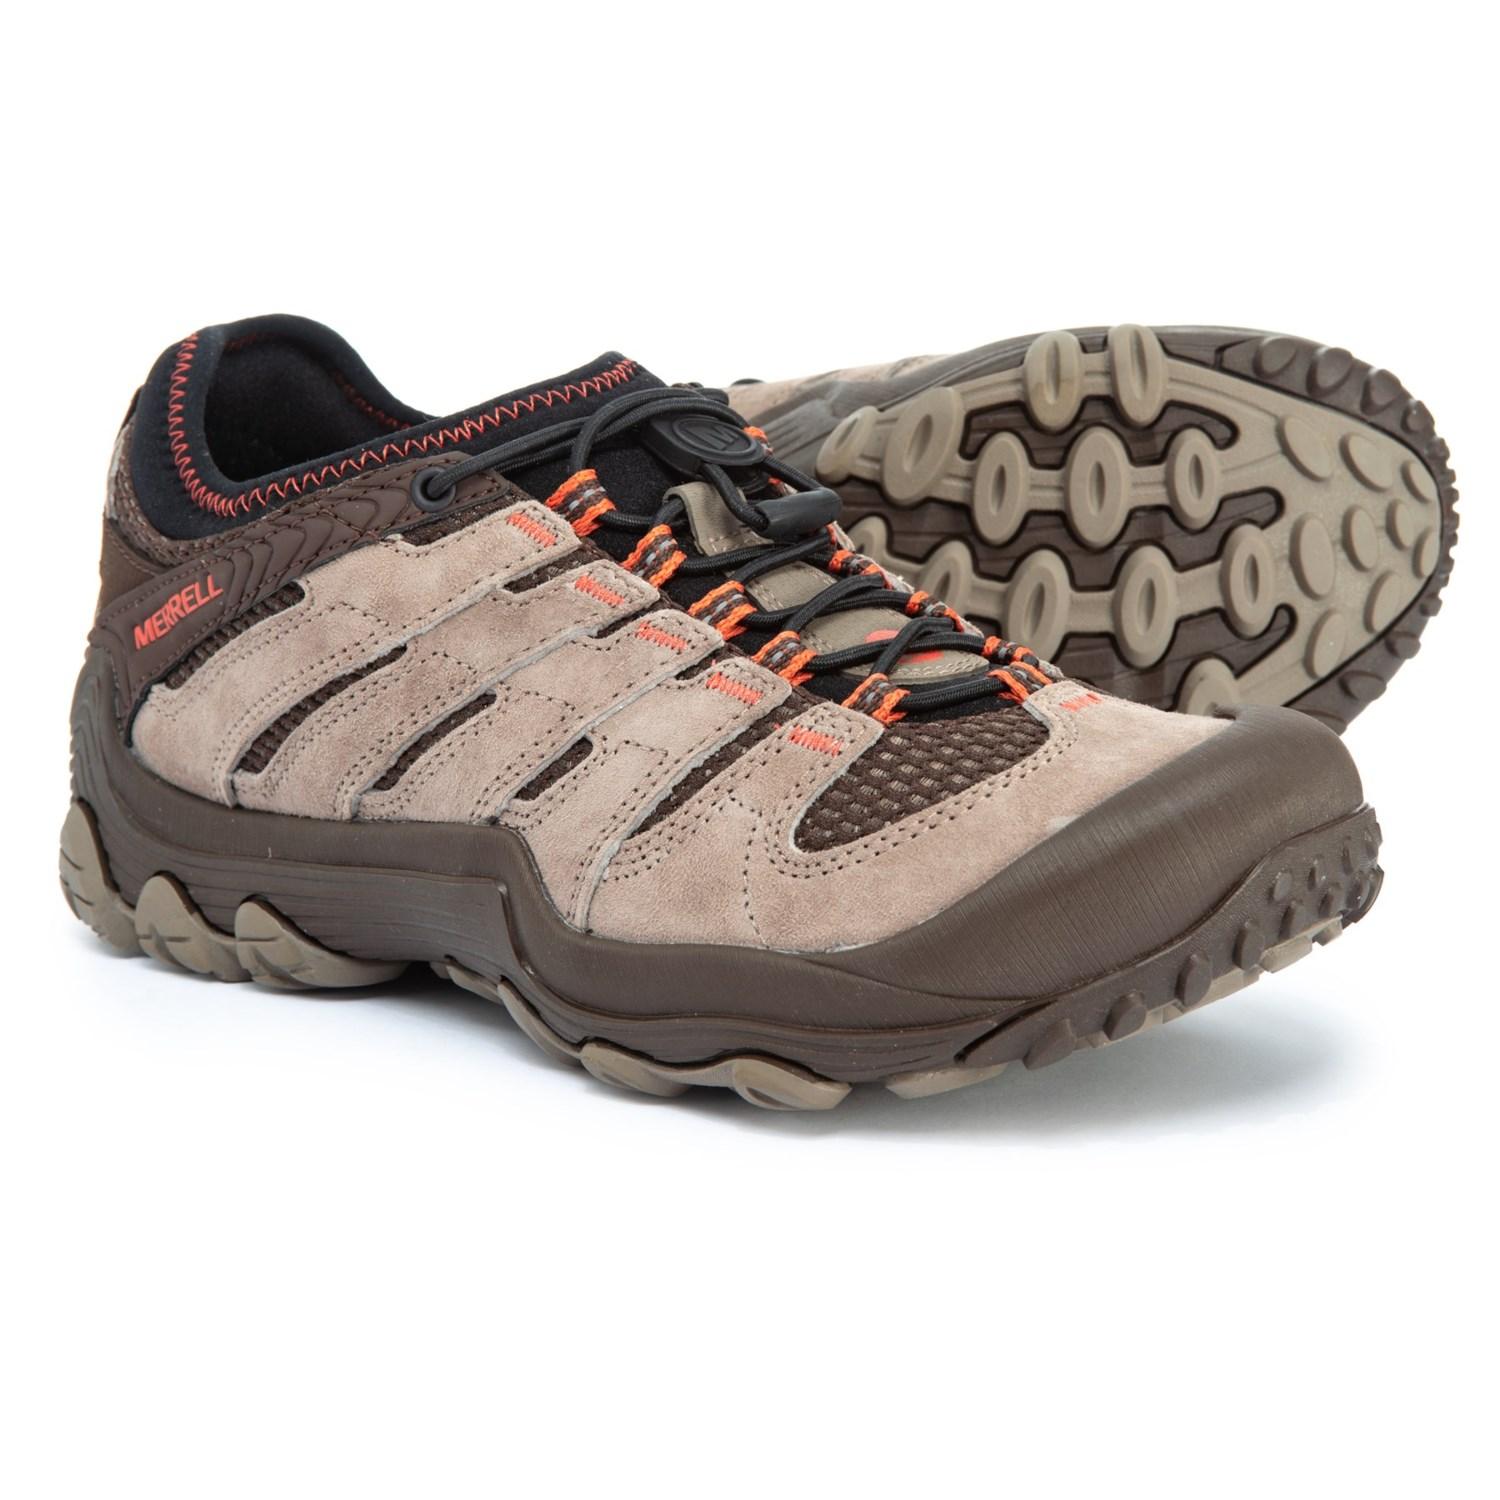 Merrell Chameleon 7 Limit Stretch Hiking Shoes - Lyst